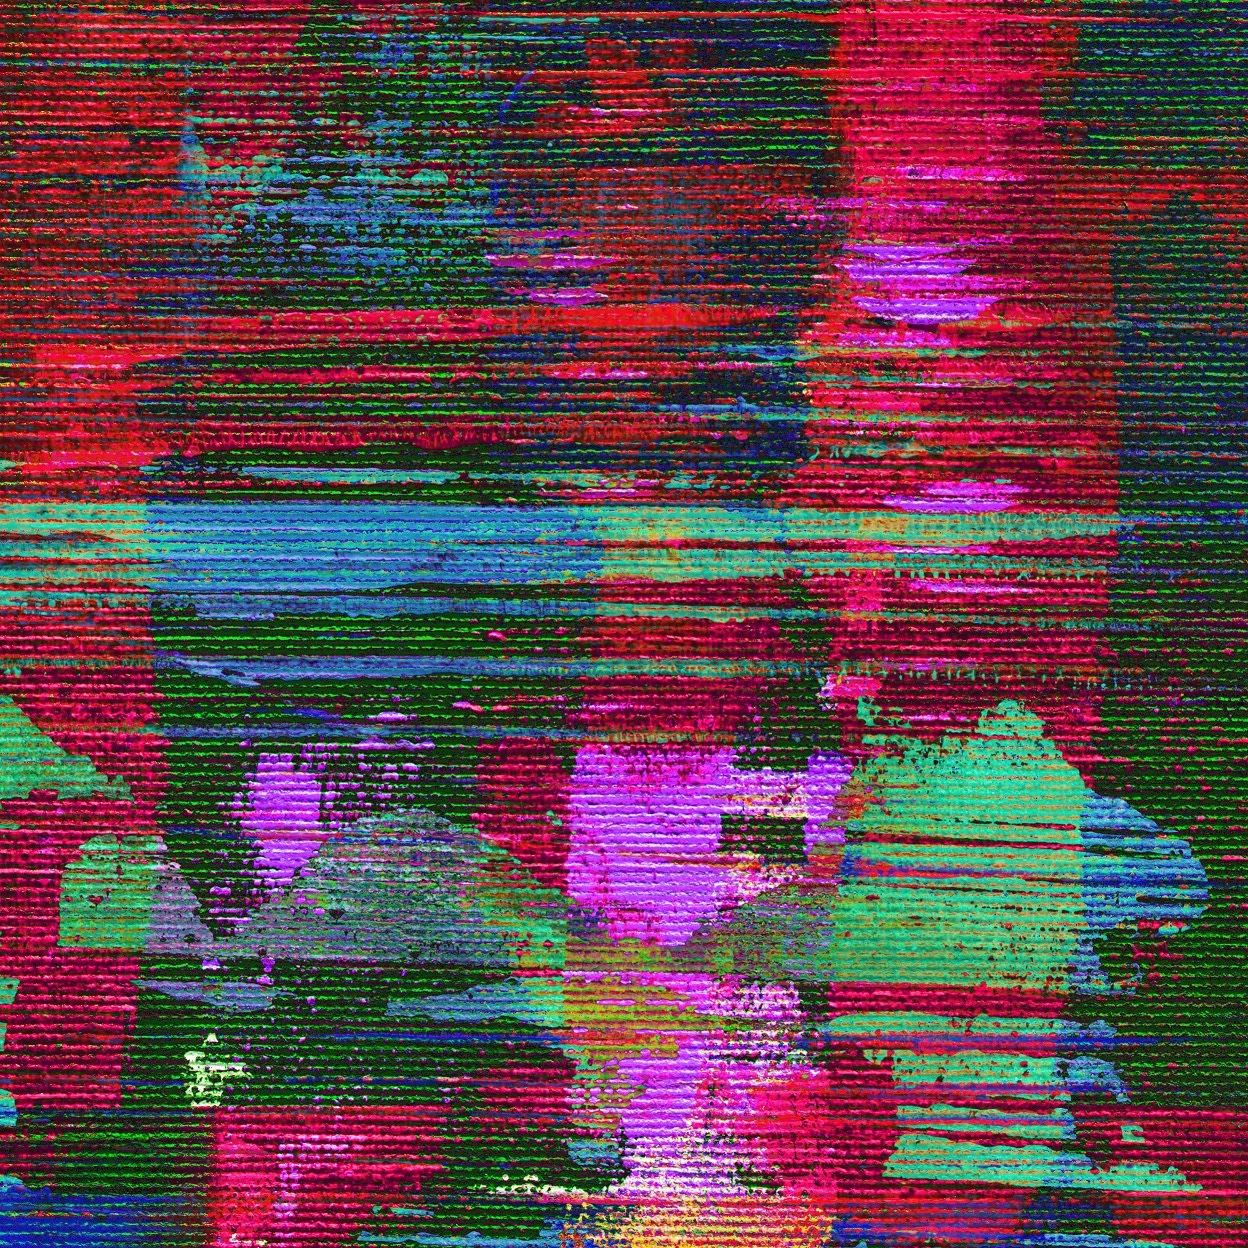 Digital Abstractions